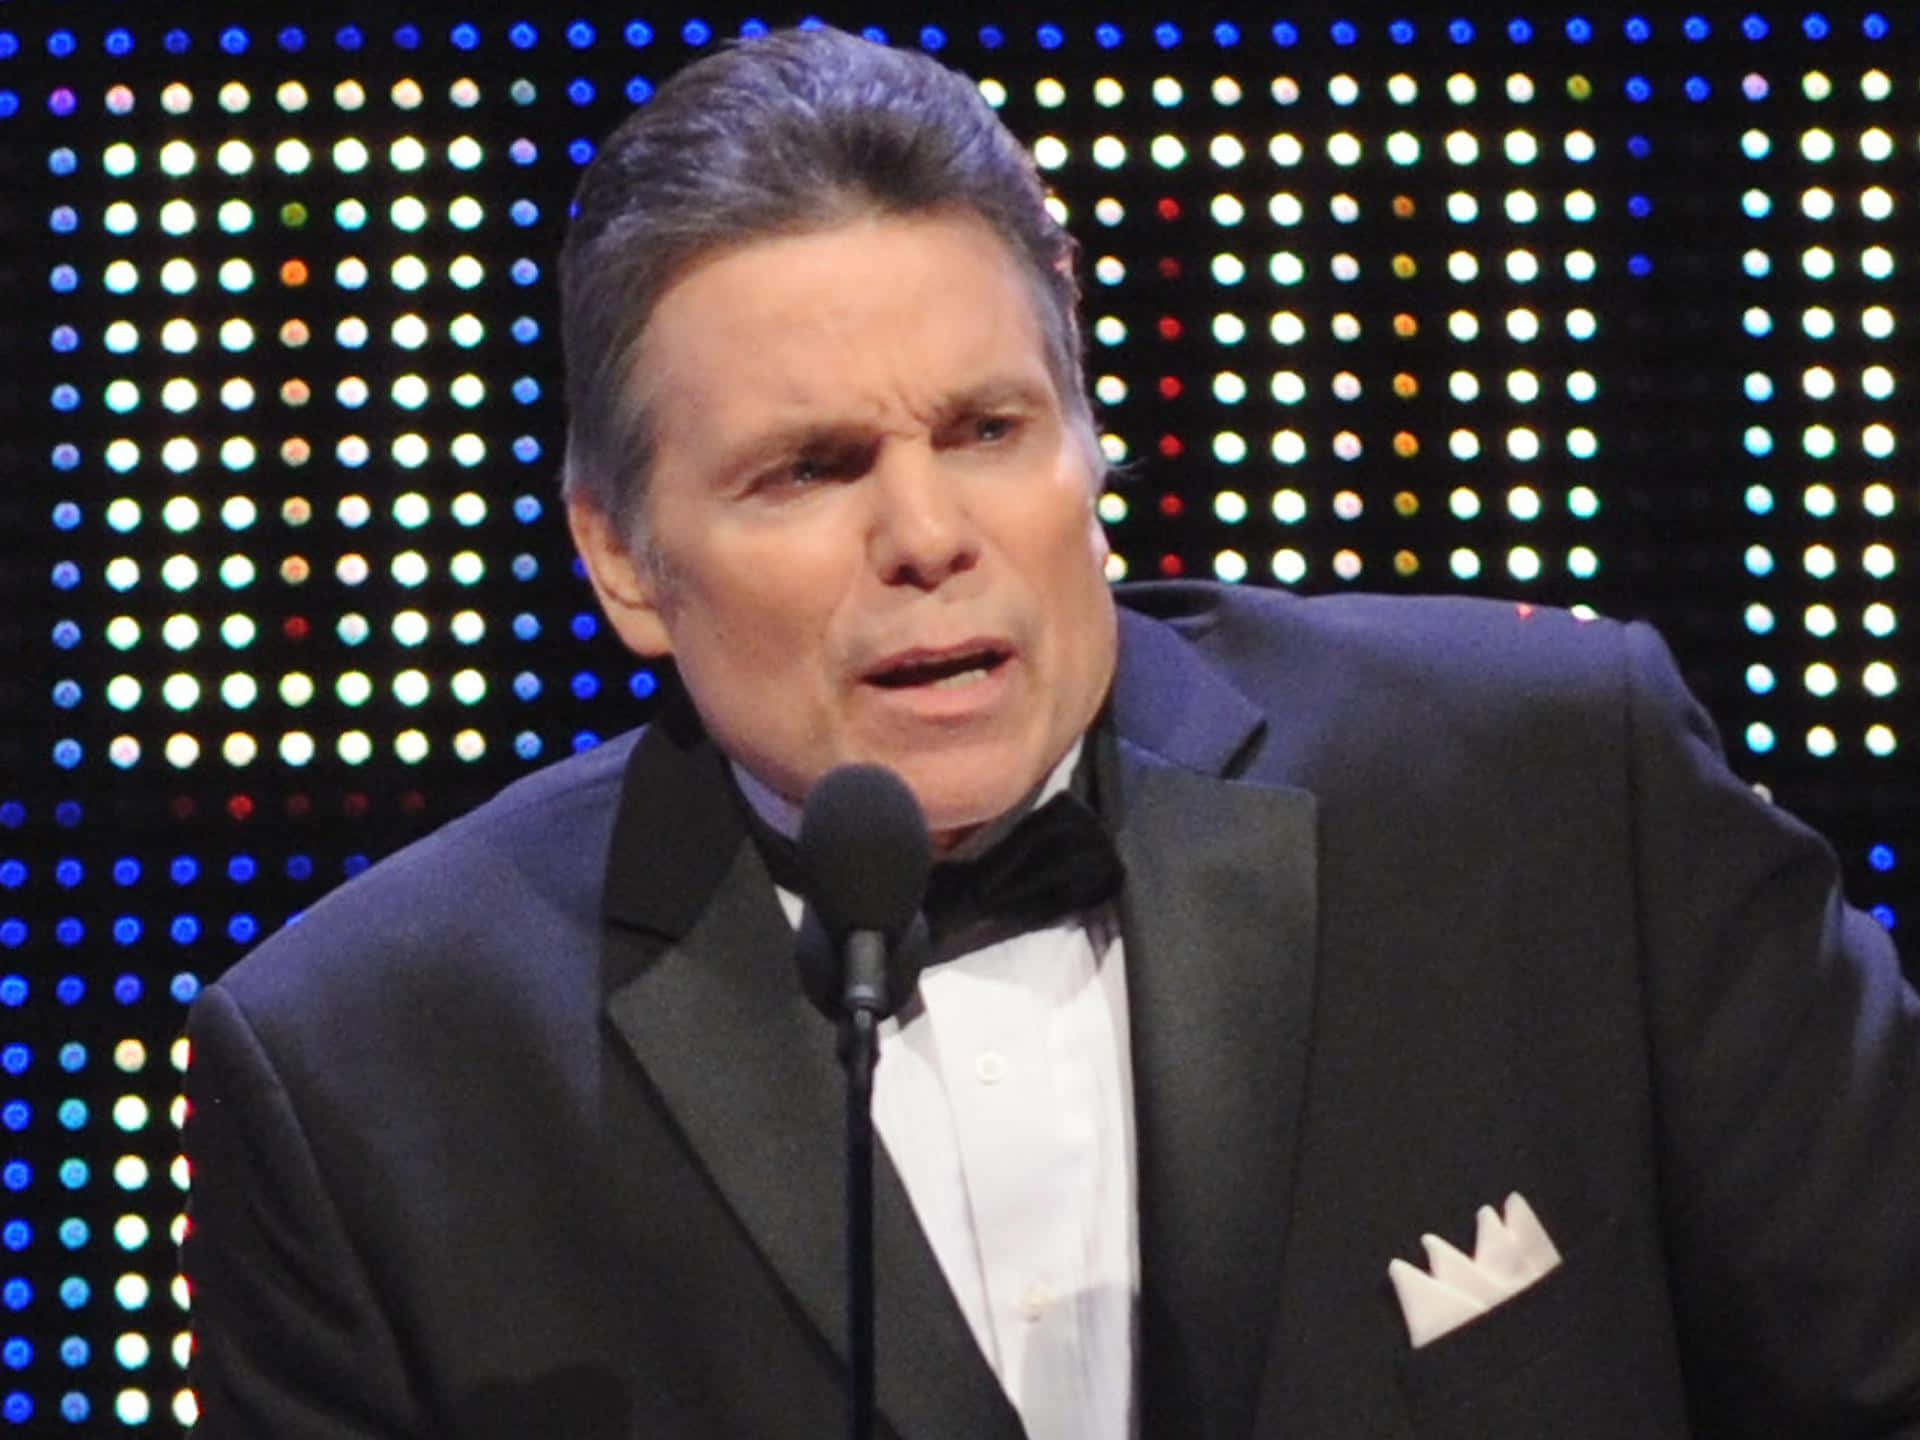 Lanny Poffo Holds A Microphone During An Interview Wallpaper